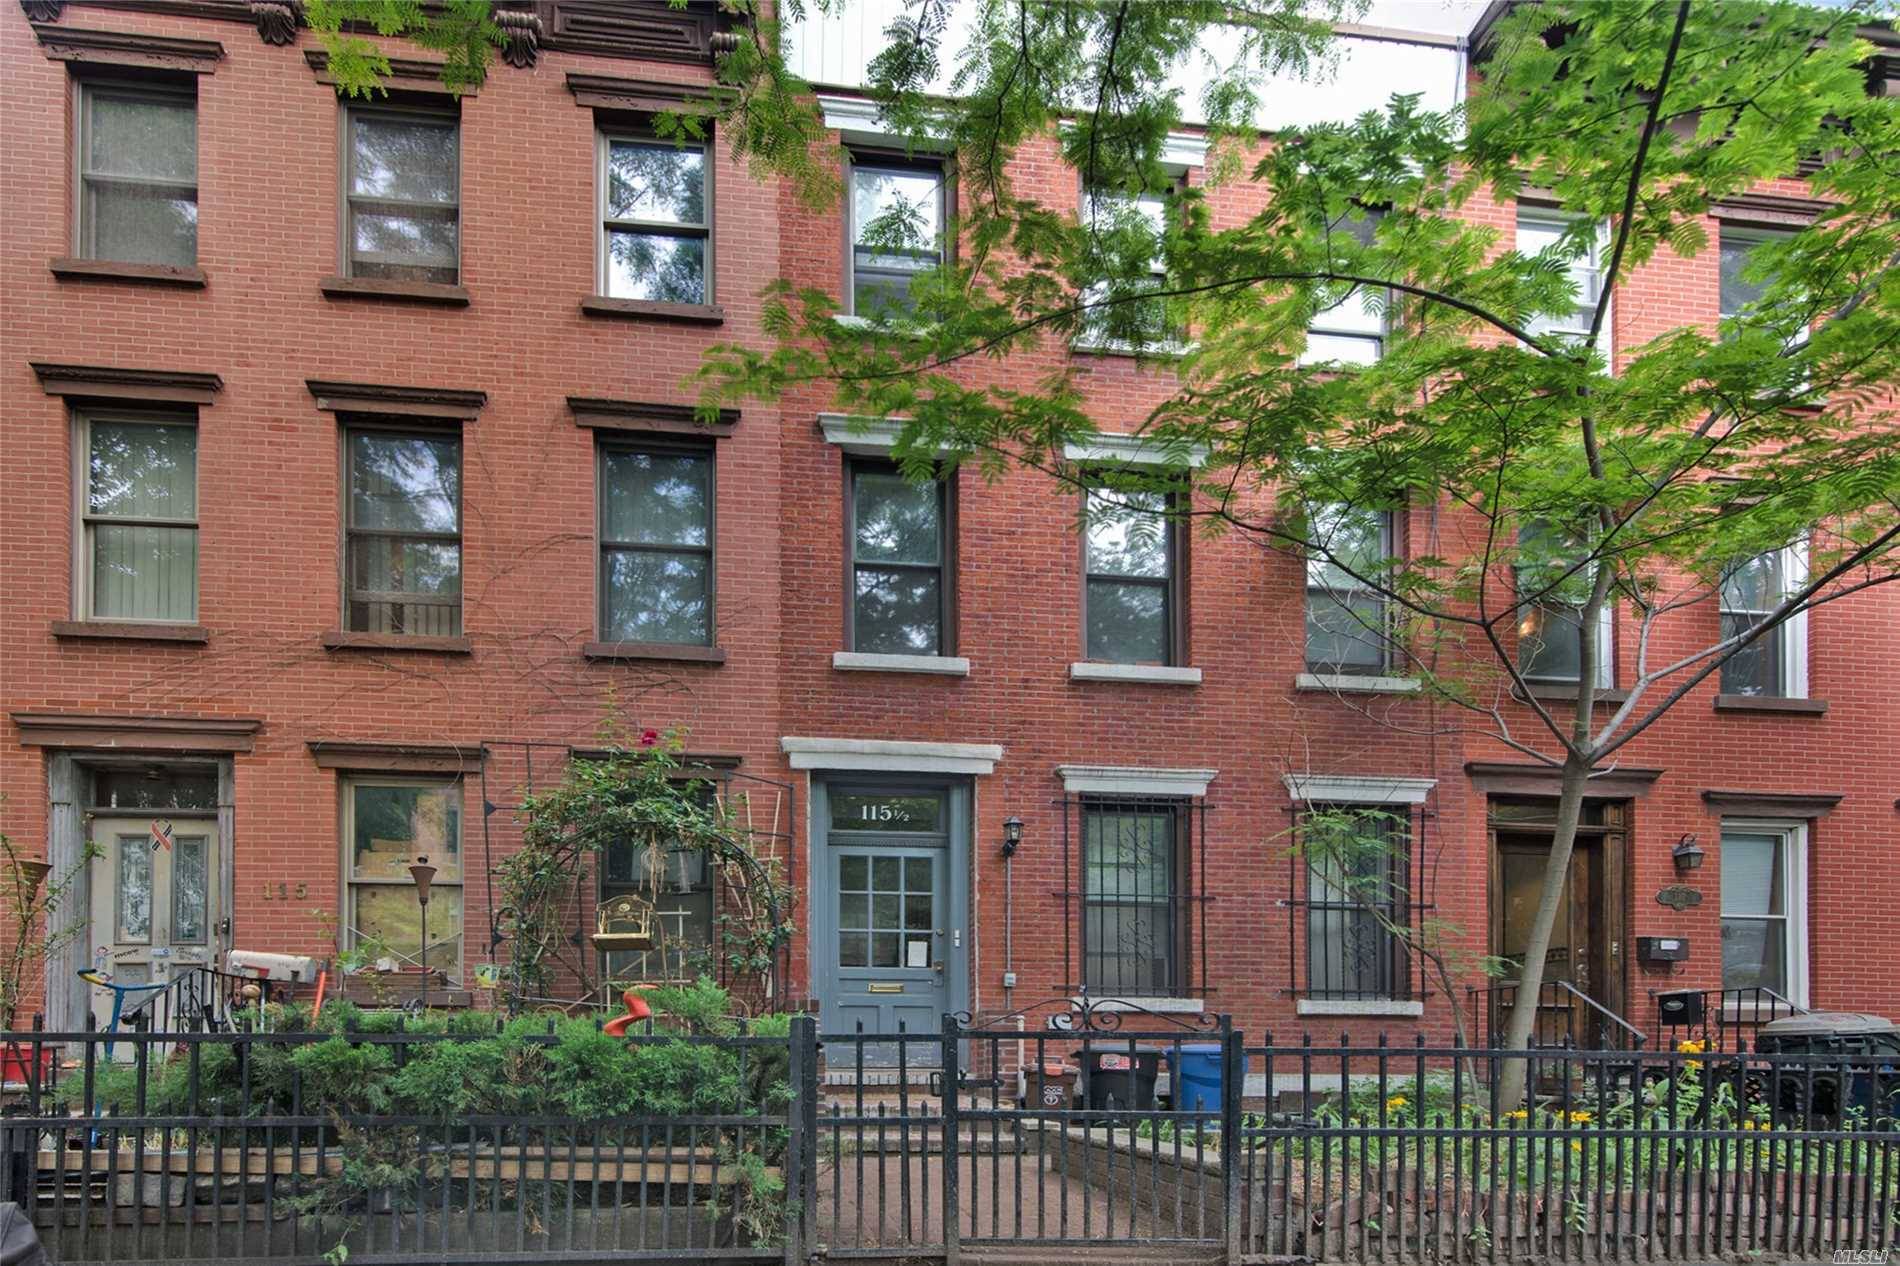 Beautiful 2 Family Brick (3 Levels) In Prime Greenpoint.